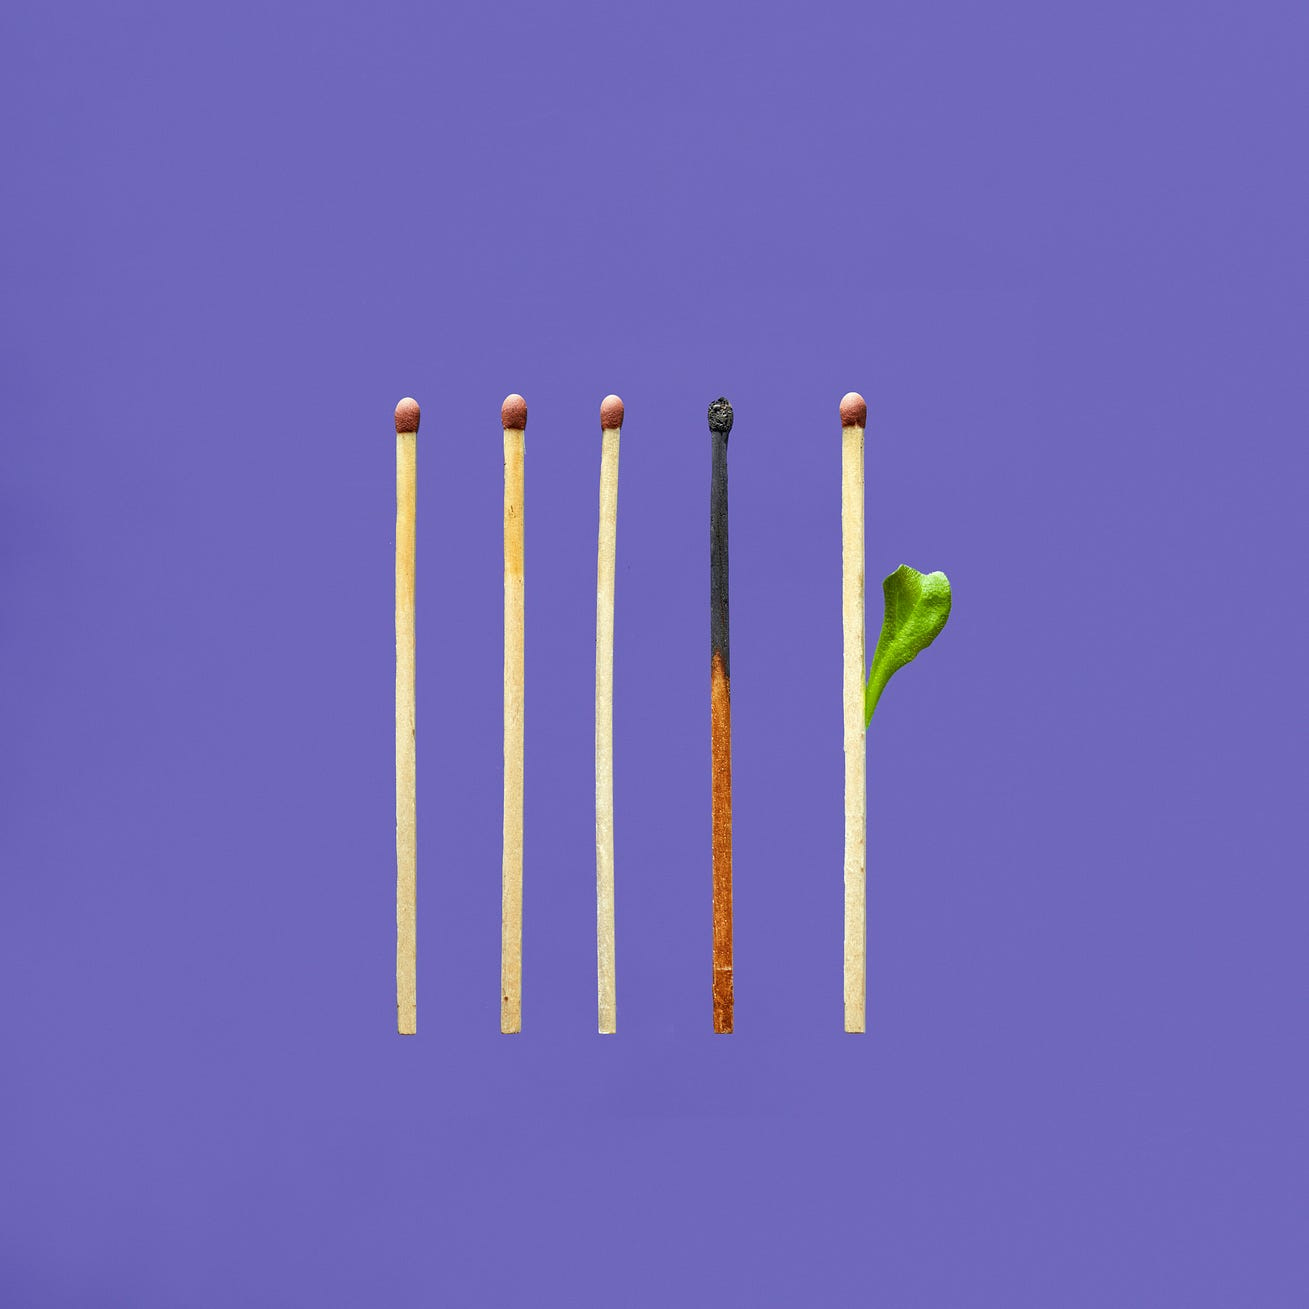 Five Matches — One burnt, and one growing a leaf